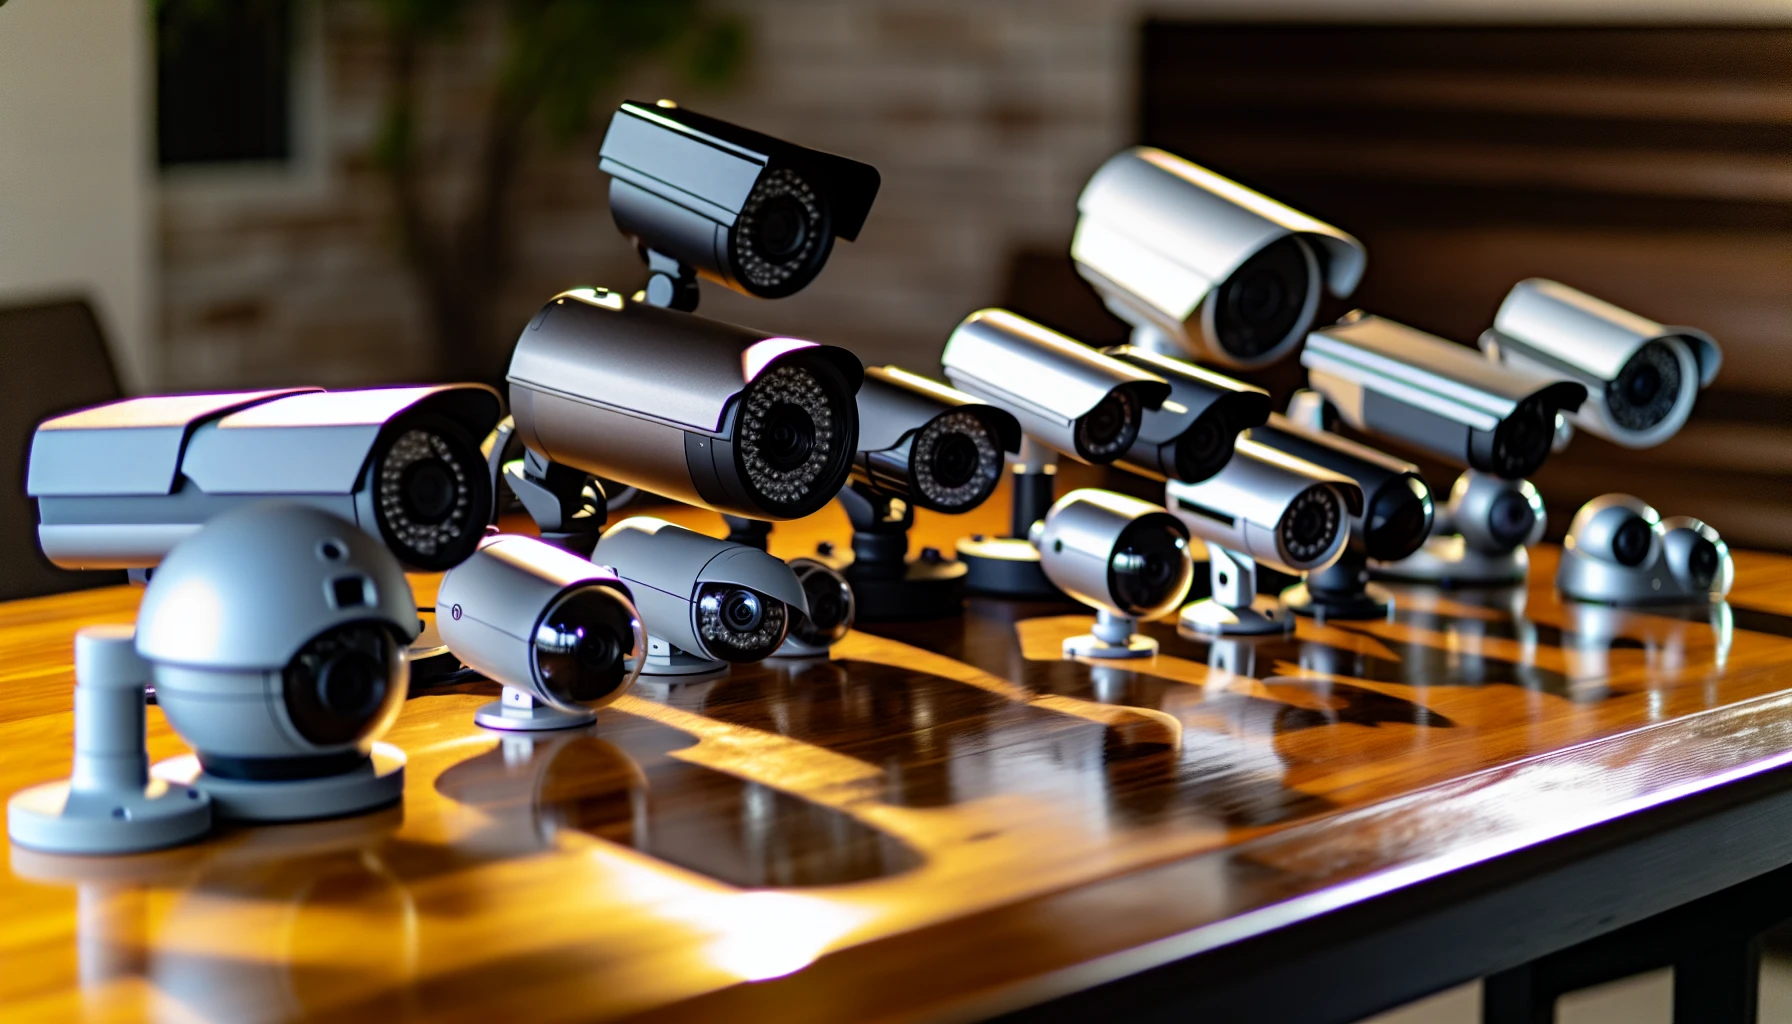 Choosing the right security camera system